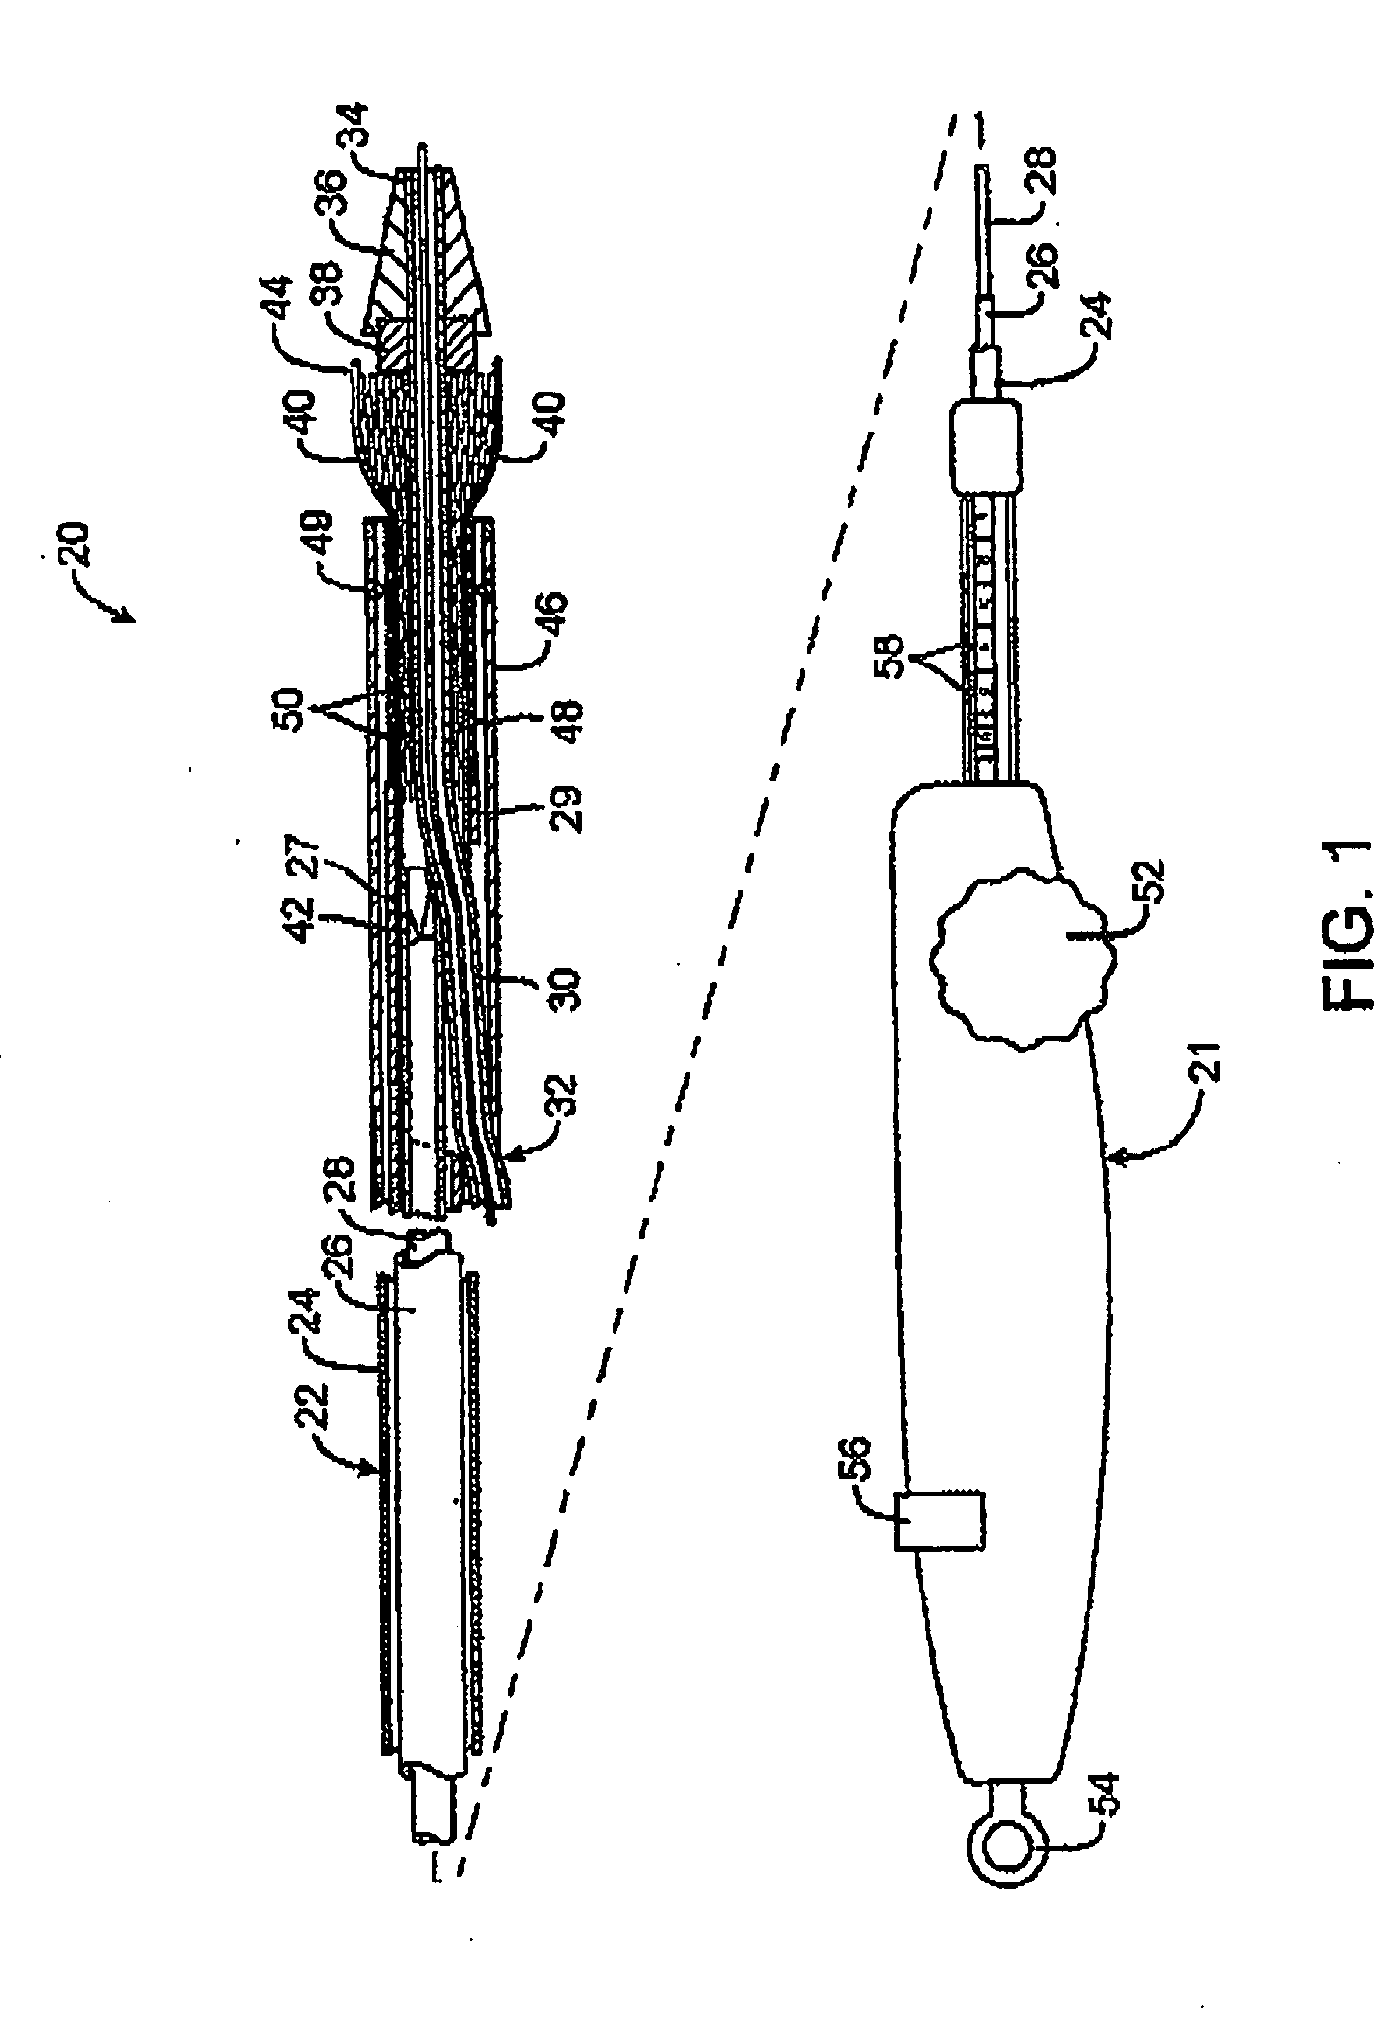 Devices and methods for controlling expandable prosthesis during develoyment